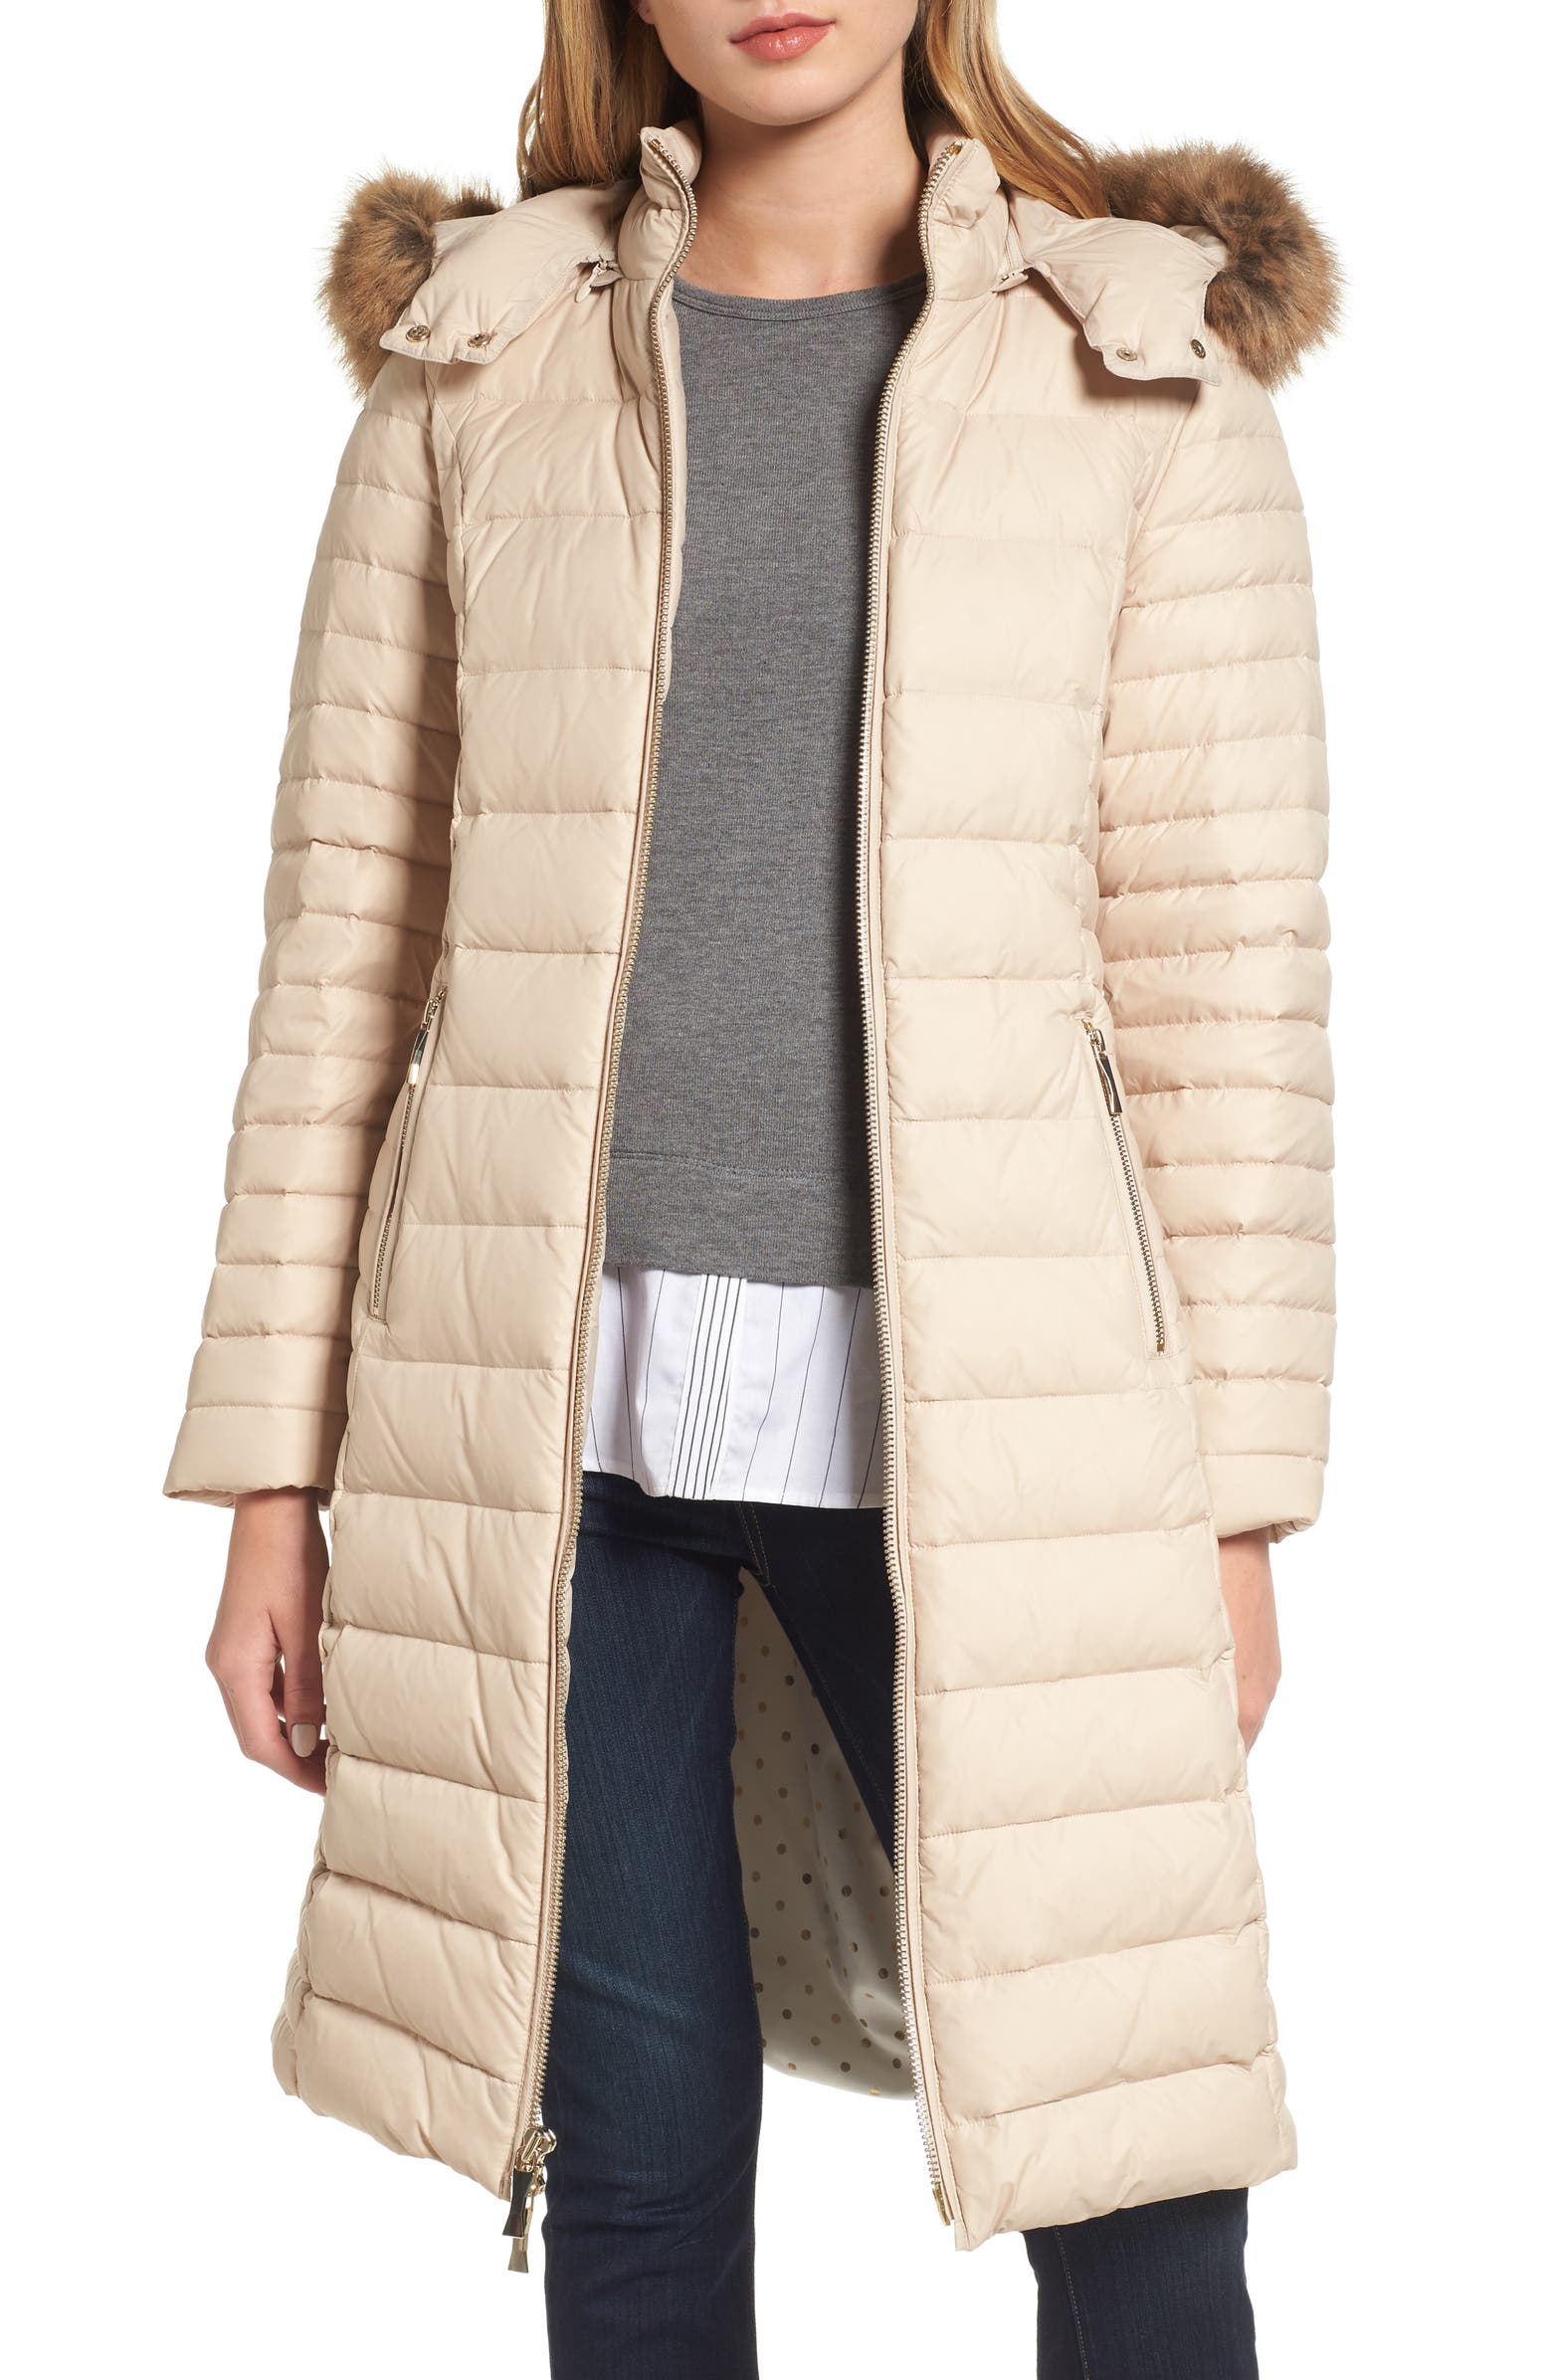 kate spade new york down puffer coat with faux fur trim | Nordstrom